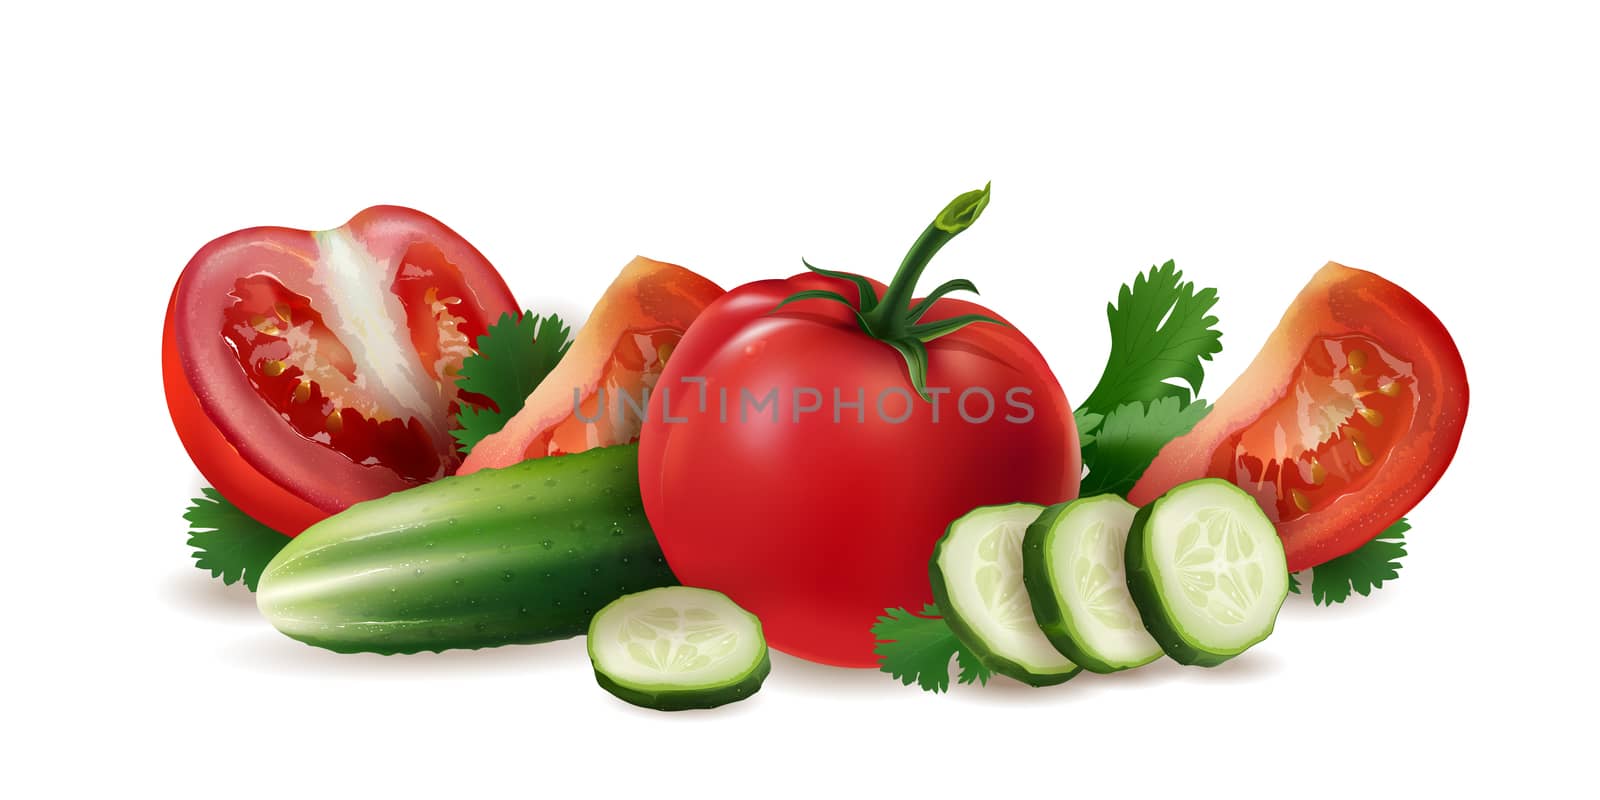 Tomatoes, cucumber and salad on white background.